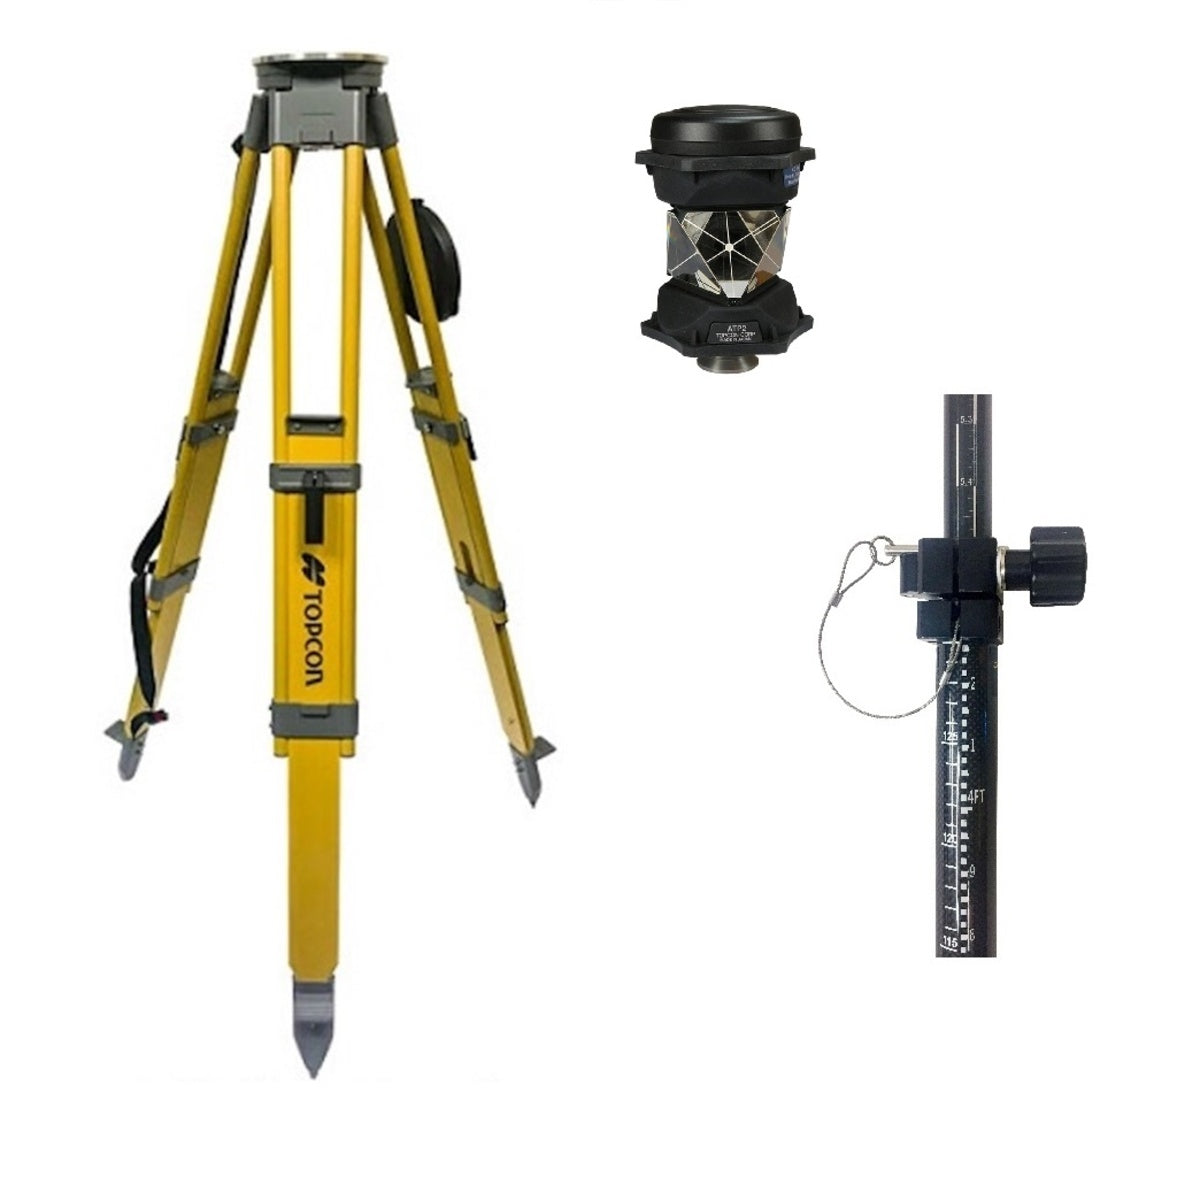 Topcon Robotic Total Station Kit For Surveying - 019800-01